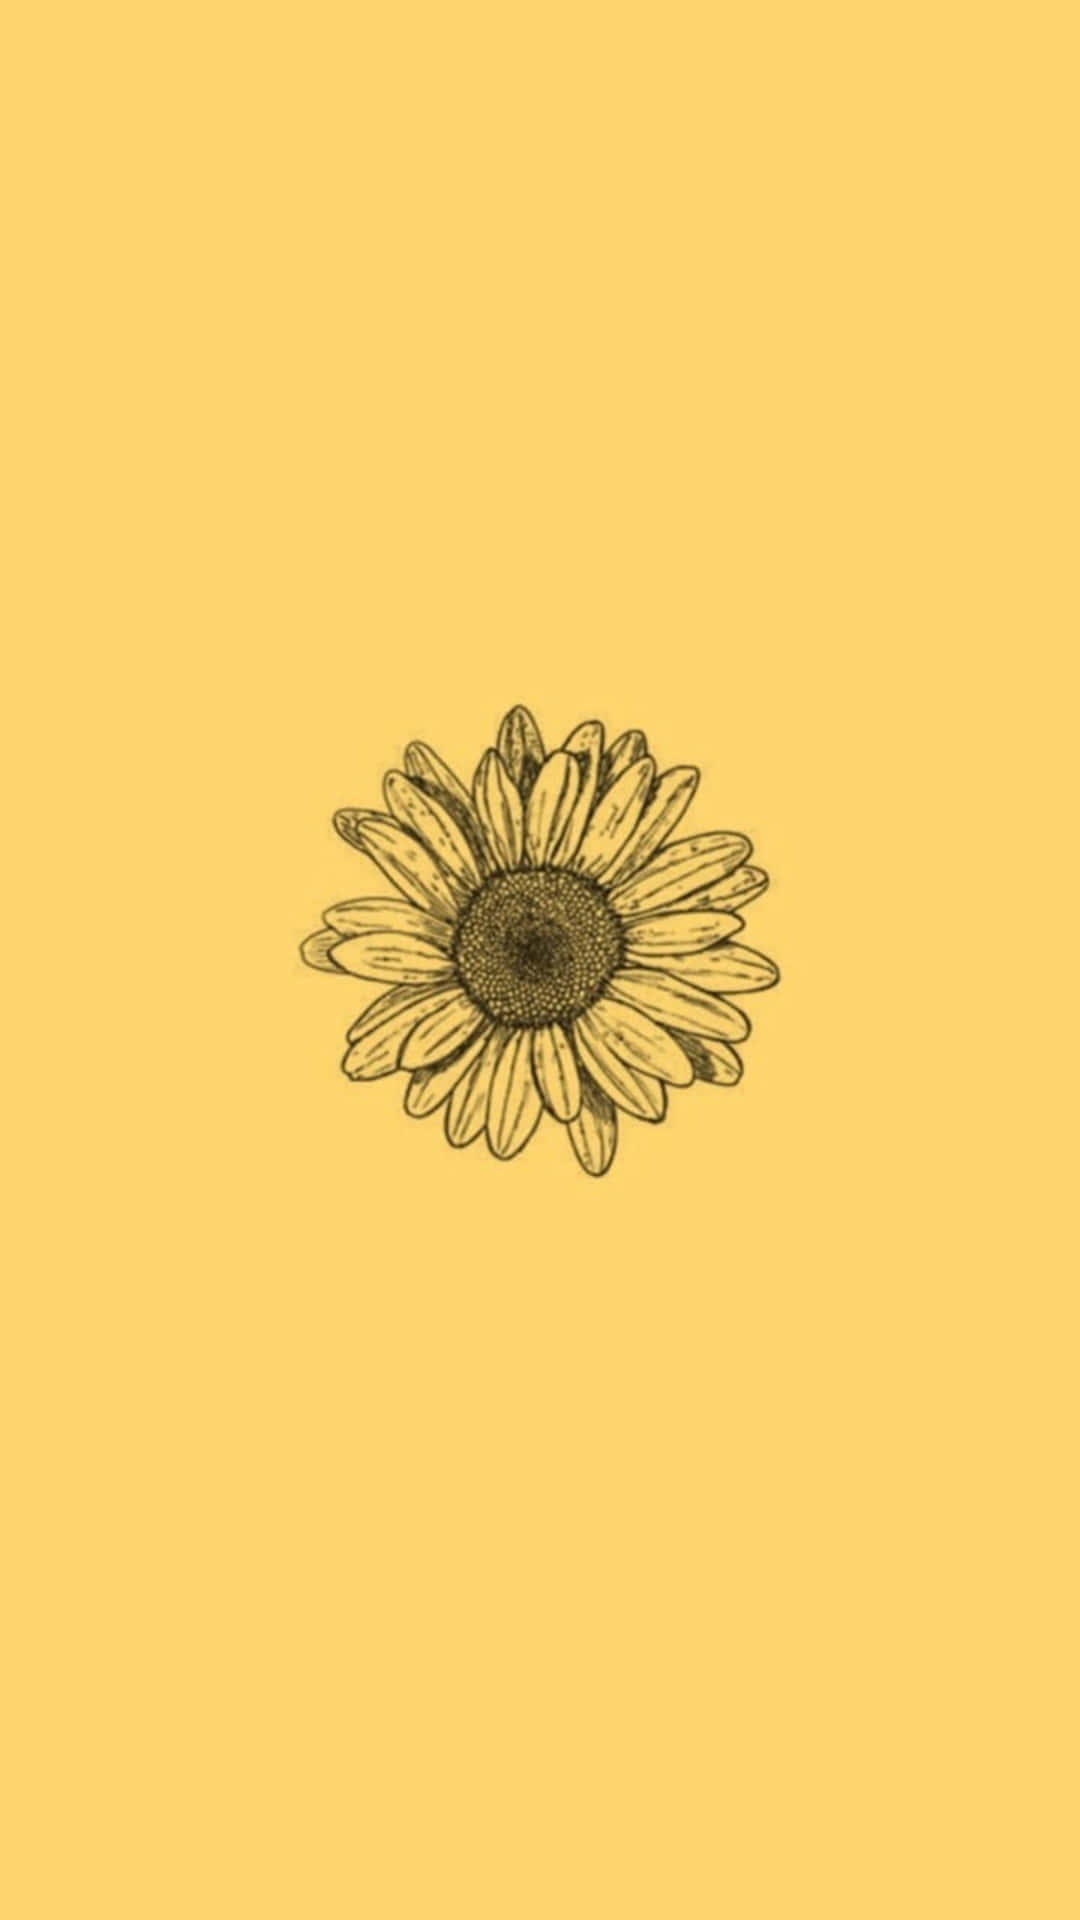 A Sunflower On A Yellow Background